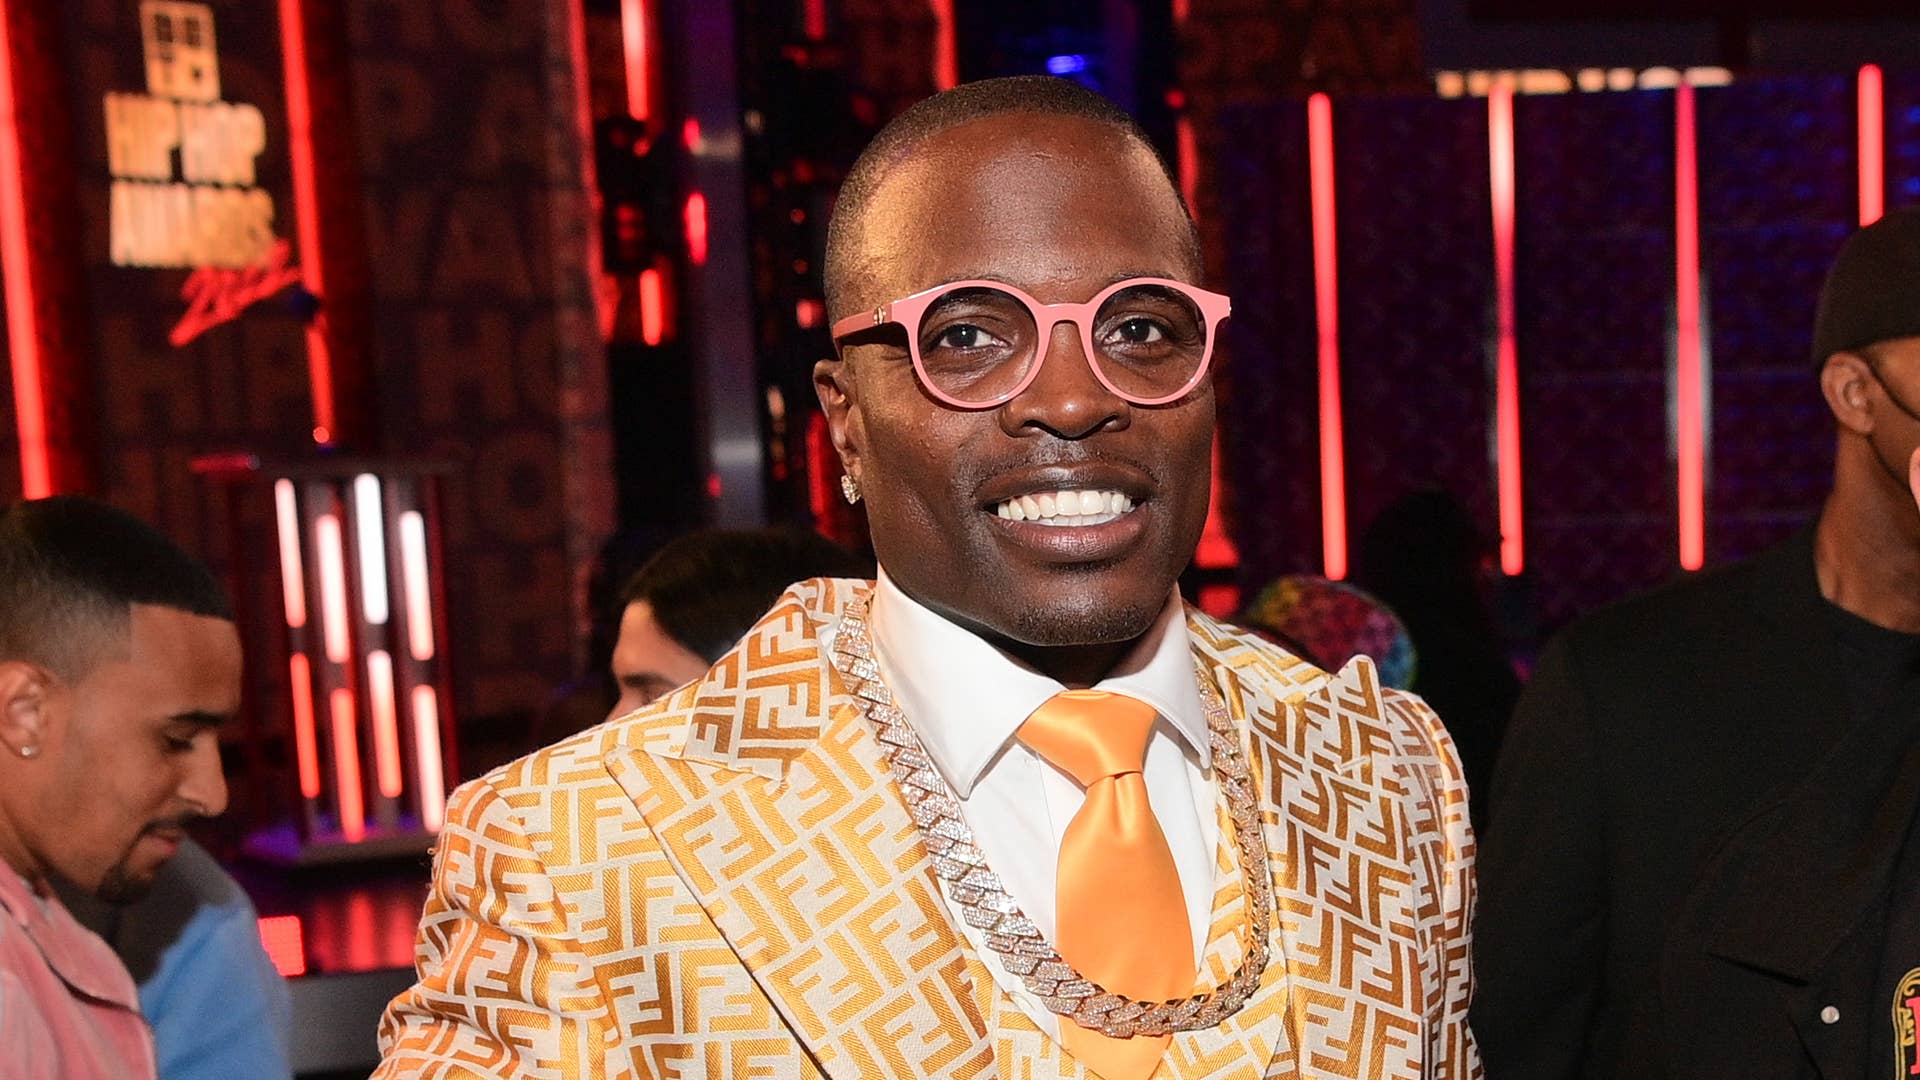 Bishop Lamor Whitehead attends the BET Hip Hop Awards 2022